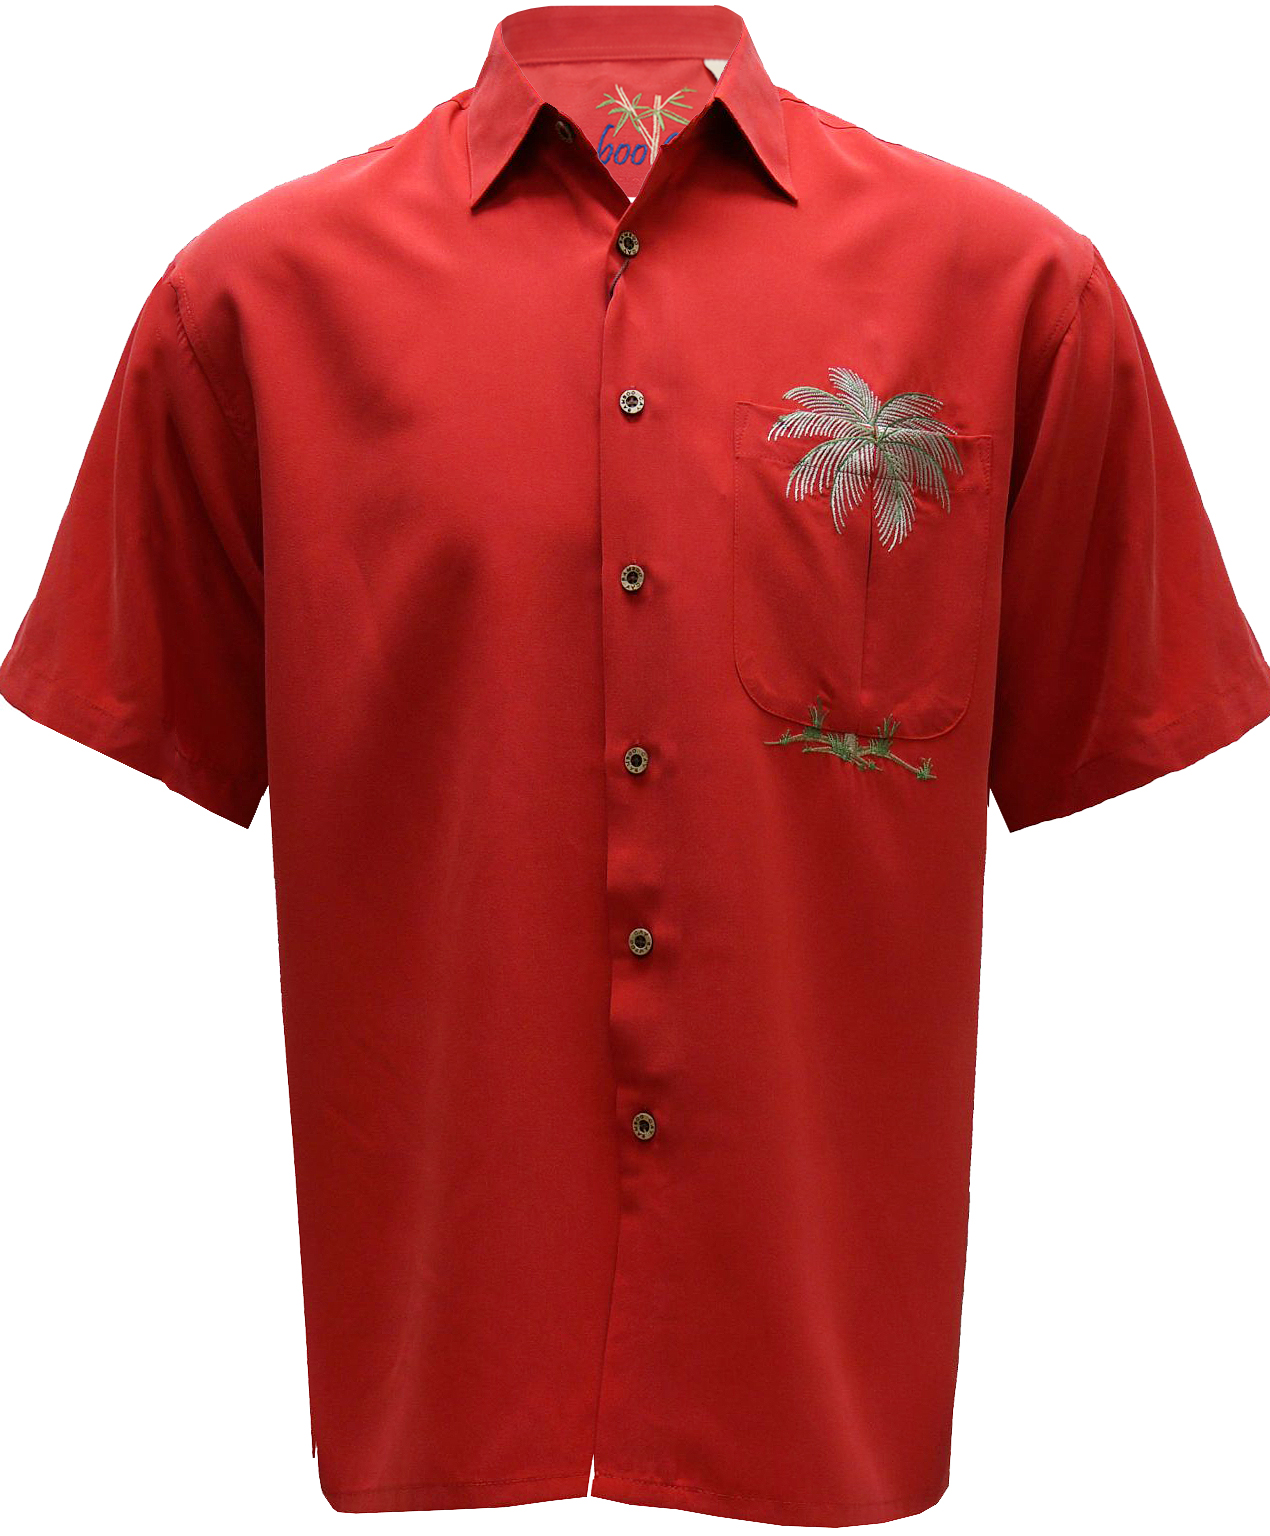 Bamboo Cay All Palms w/Slit Embroidered Camp Shirt